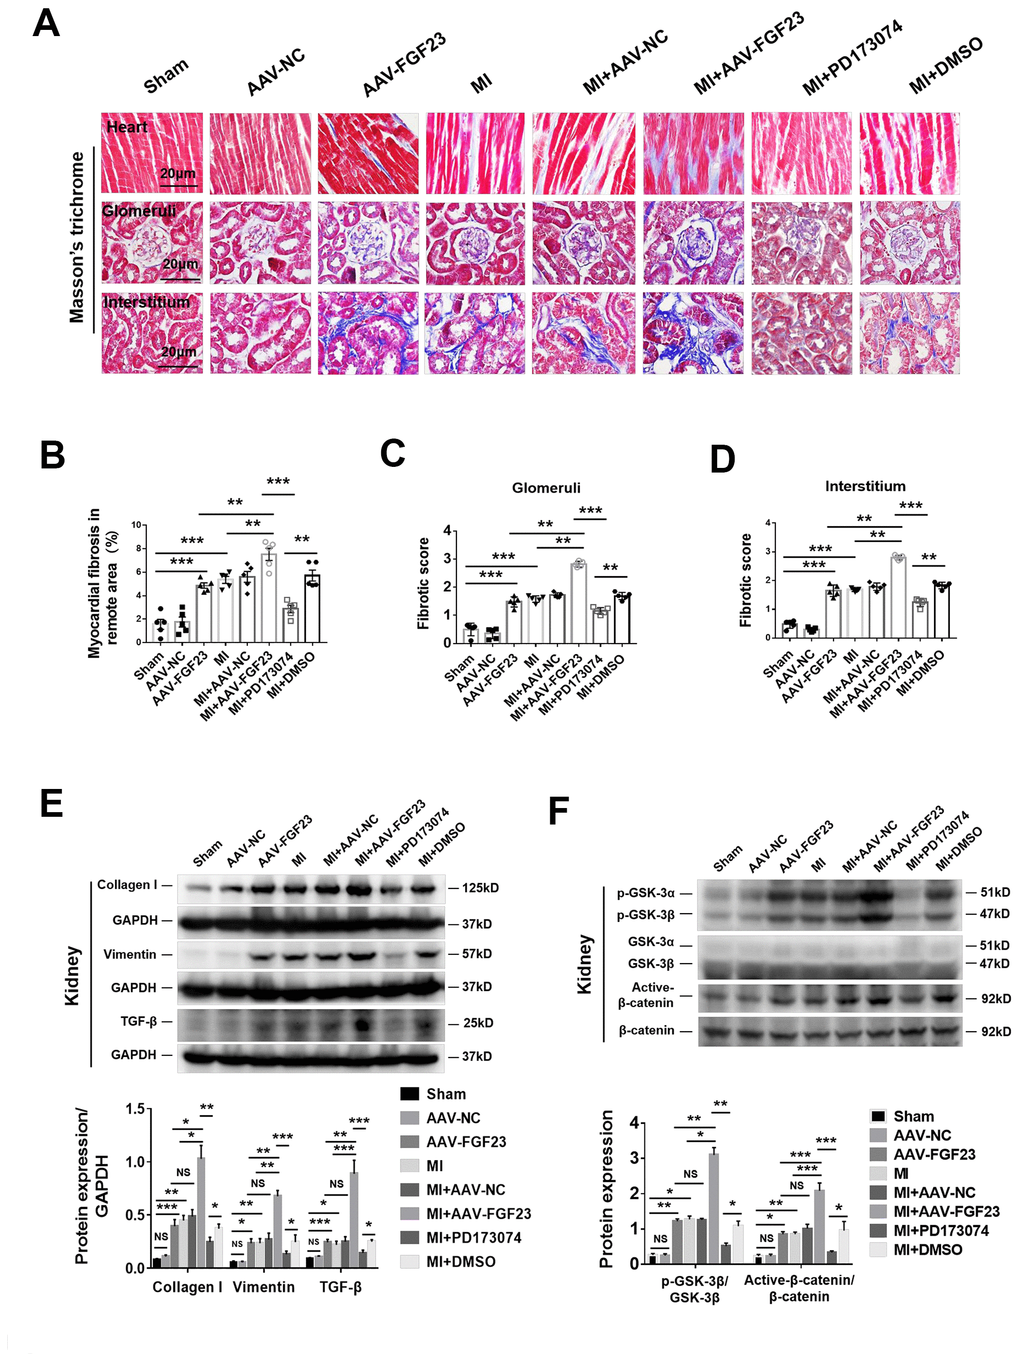 FGF23 overexpression further enhanced cardiac and renal fibrosis, and promoted activation of fibrosis-related signaling pathways in the kidneys of mice with cardiorenal syndrome (CRS). (A) Representative photomicrographs of myocardial and renal fibrosis detected by Masson’s trichrome stain in sham, AAV-NC and AAV-FGF23 mice or CRS mice injected with AAV-NC or AAV-FGF23, or treated with PD173074 or DMSO. (B–D) Semi-quantitative assessment of myocardial, renal glomerular and interstitial fibrosis. (B–D) **P ***P E) Western blot of collagen I, vimentin and TGF-β. (F) Western blot of p-GSK-3β and active-β-catenin. For (E and F), *P **P ***P 